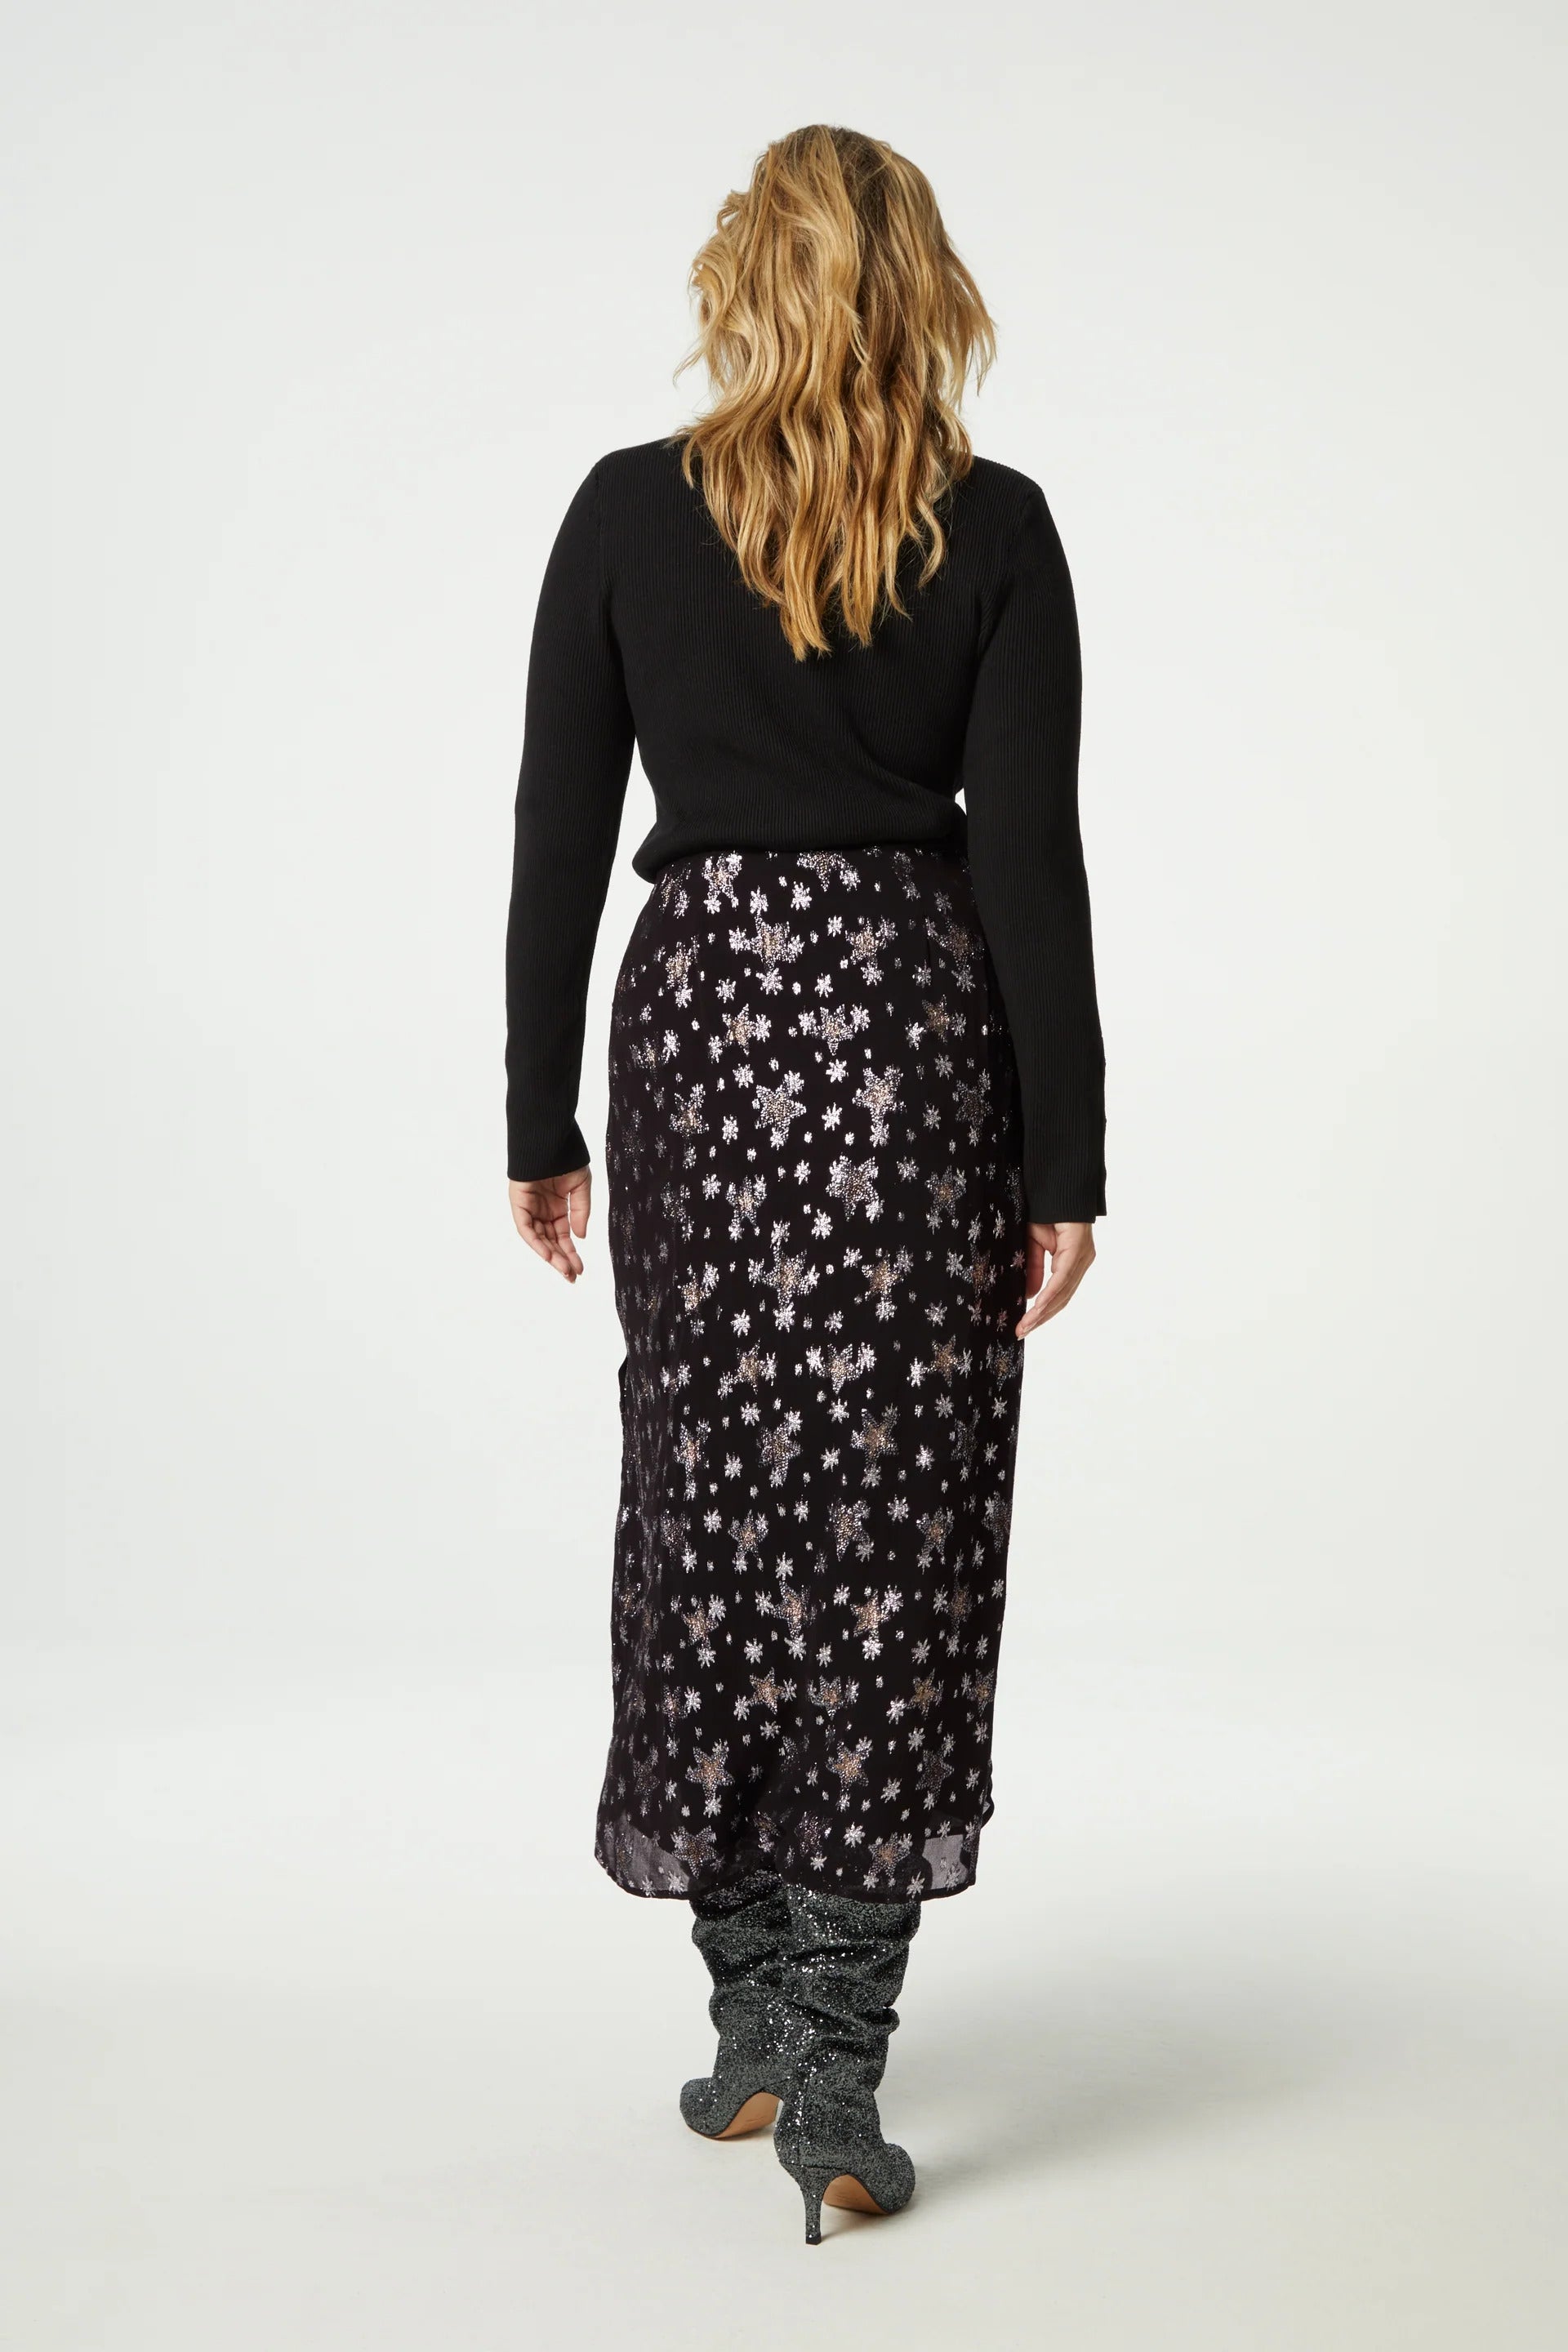 The back view of a woman wearing the Fabienne Chapot Lydia Skirt - Starfleet and black boots.